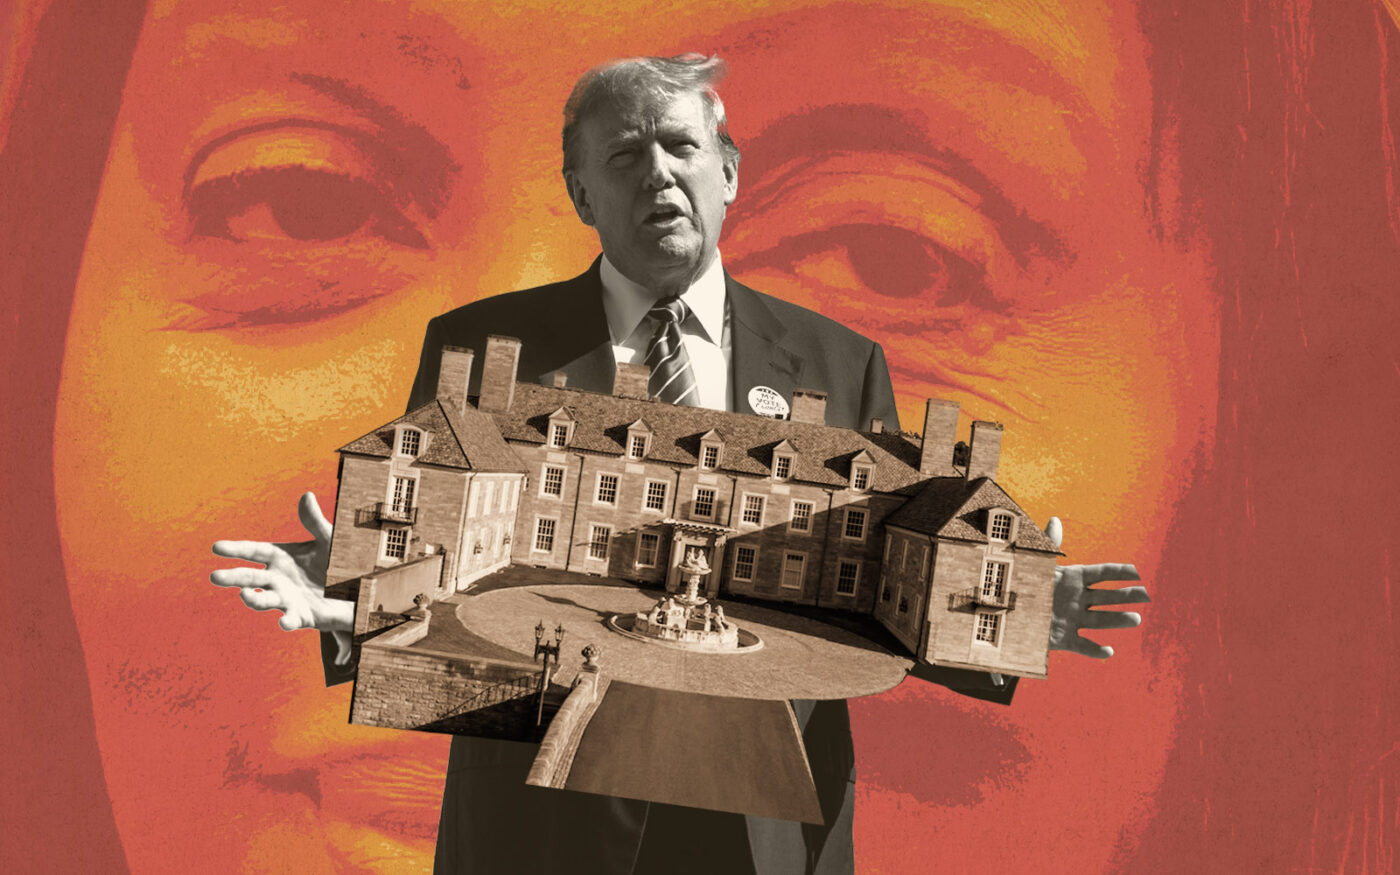 Donald Trump’s Westchester Properties Could Be First Seized